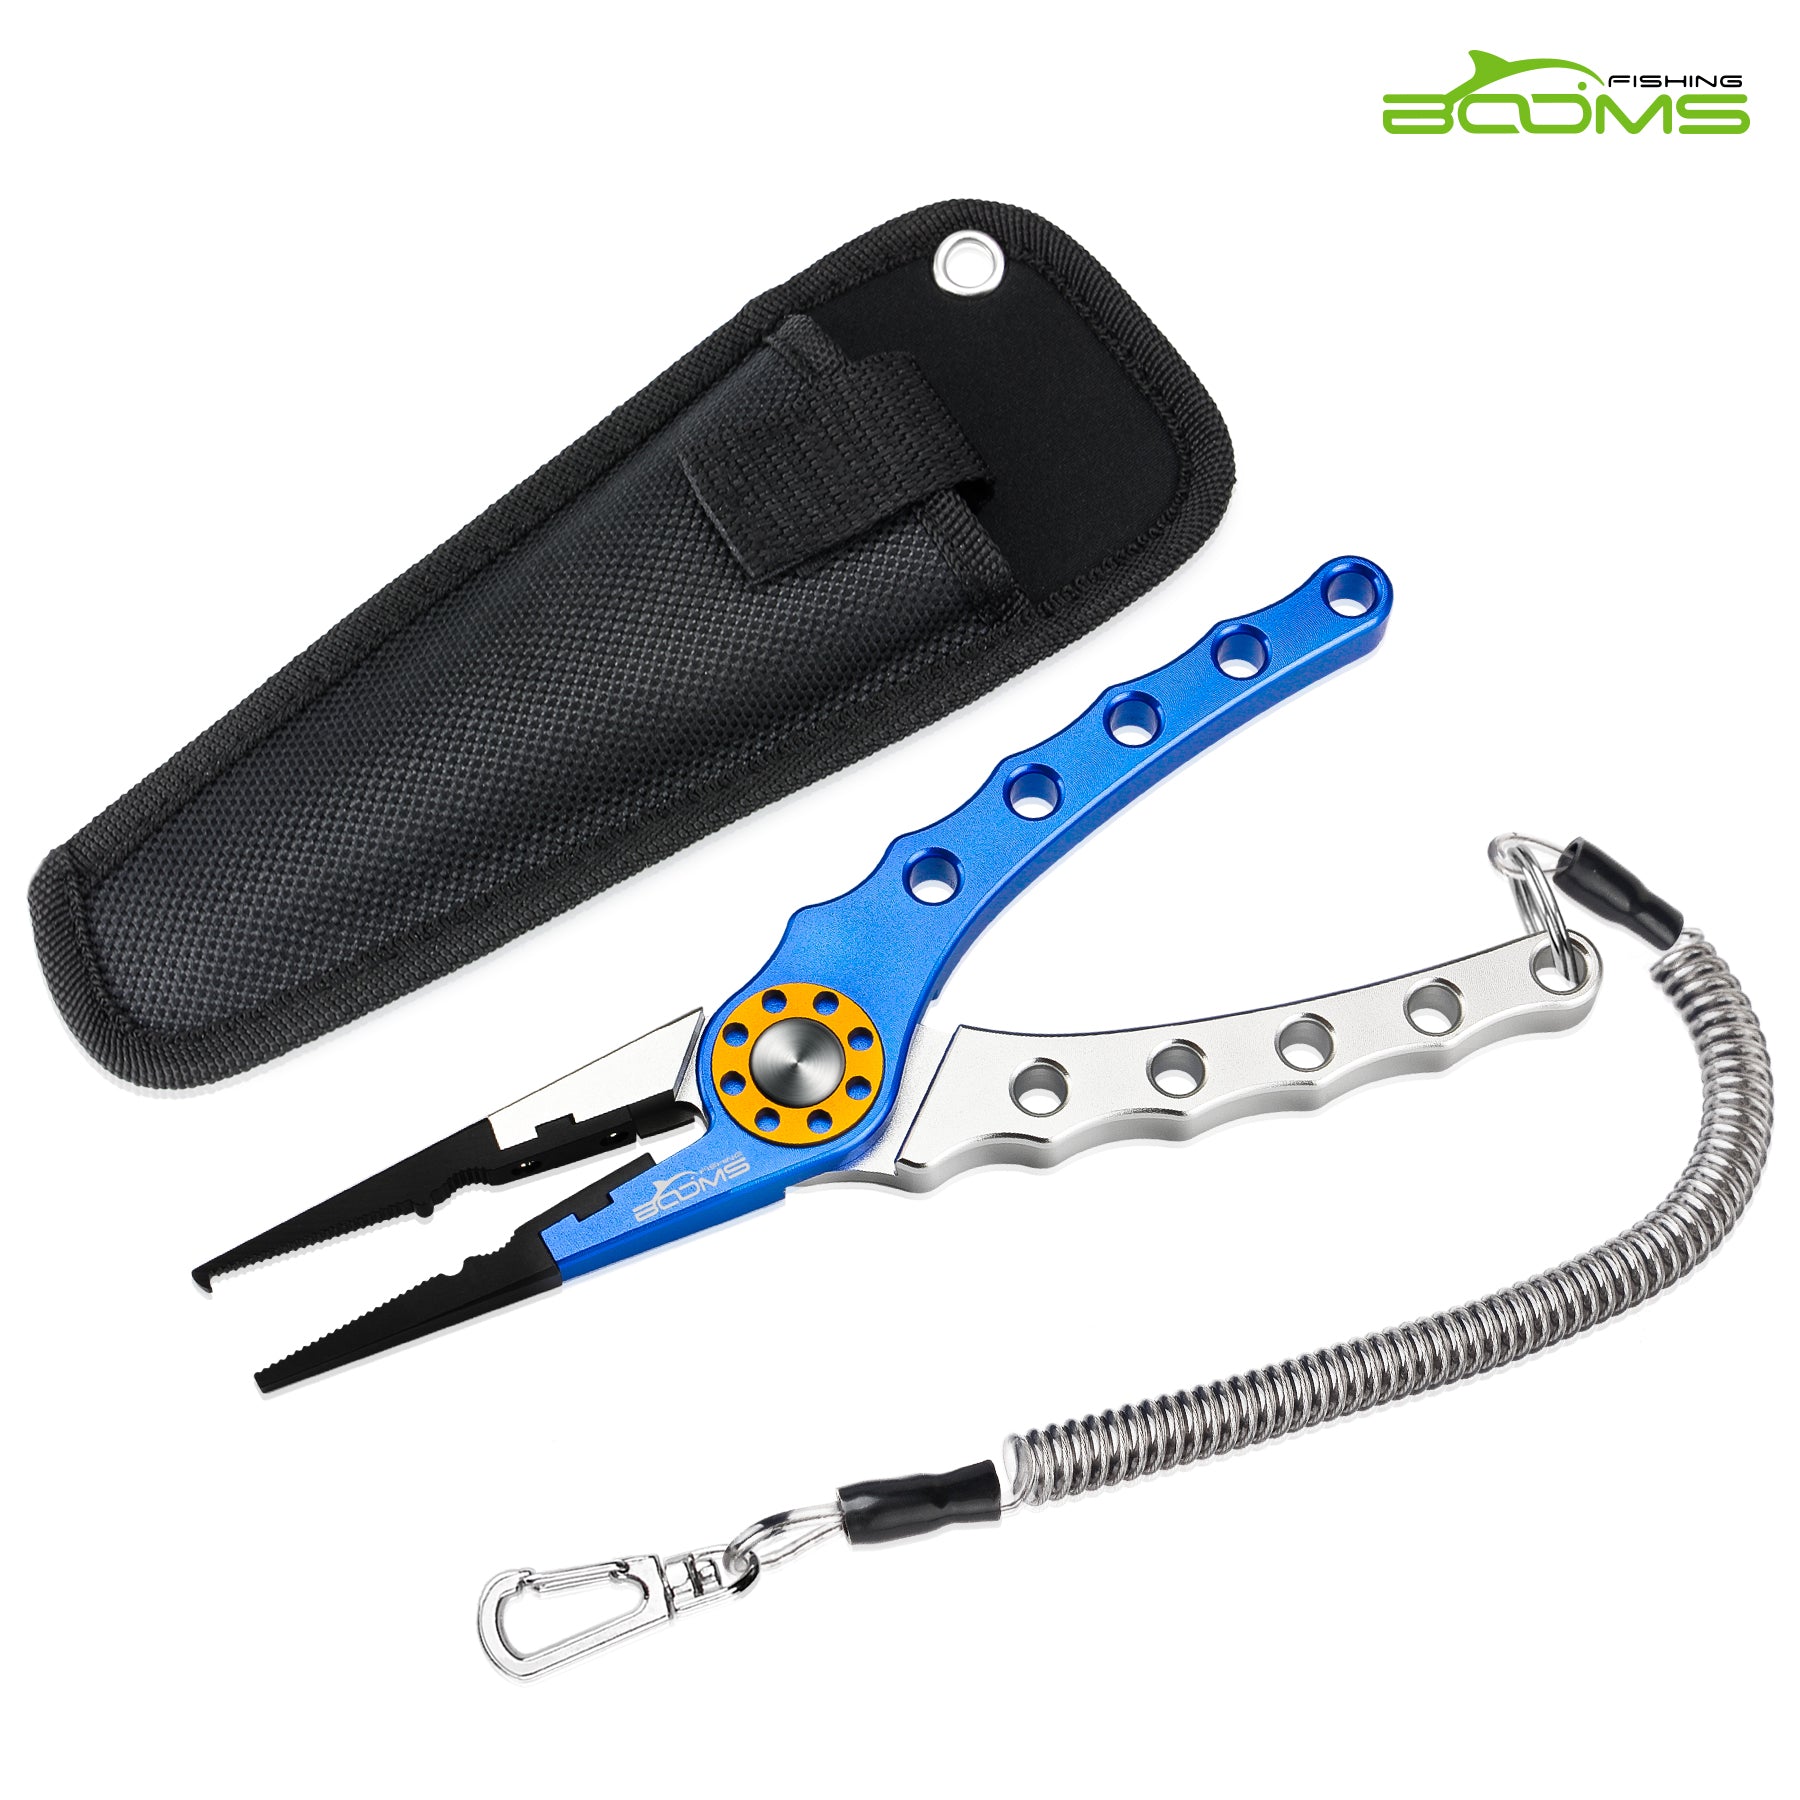 X01 Aluminum Fishing Pliers with Lanyard and Sheath